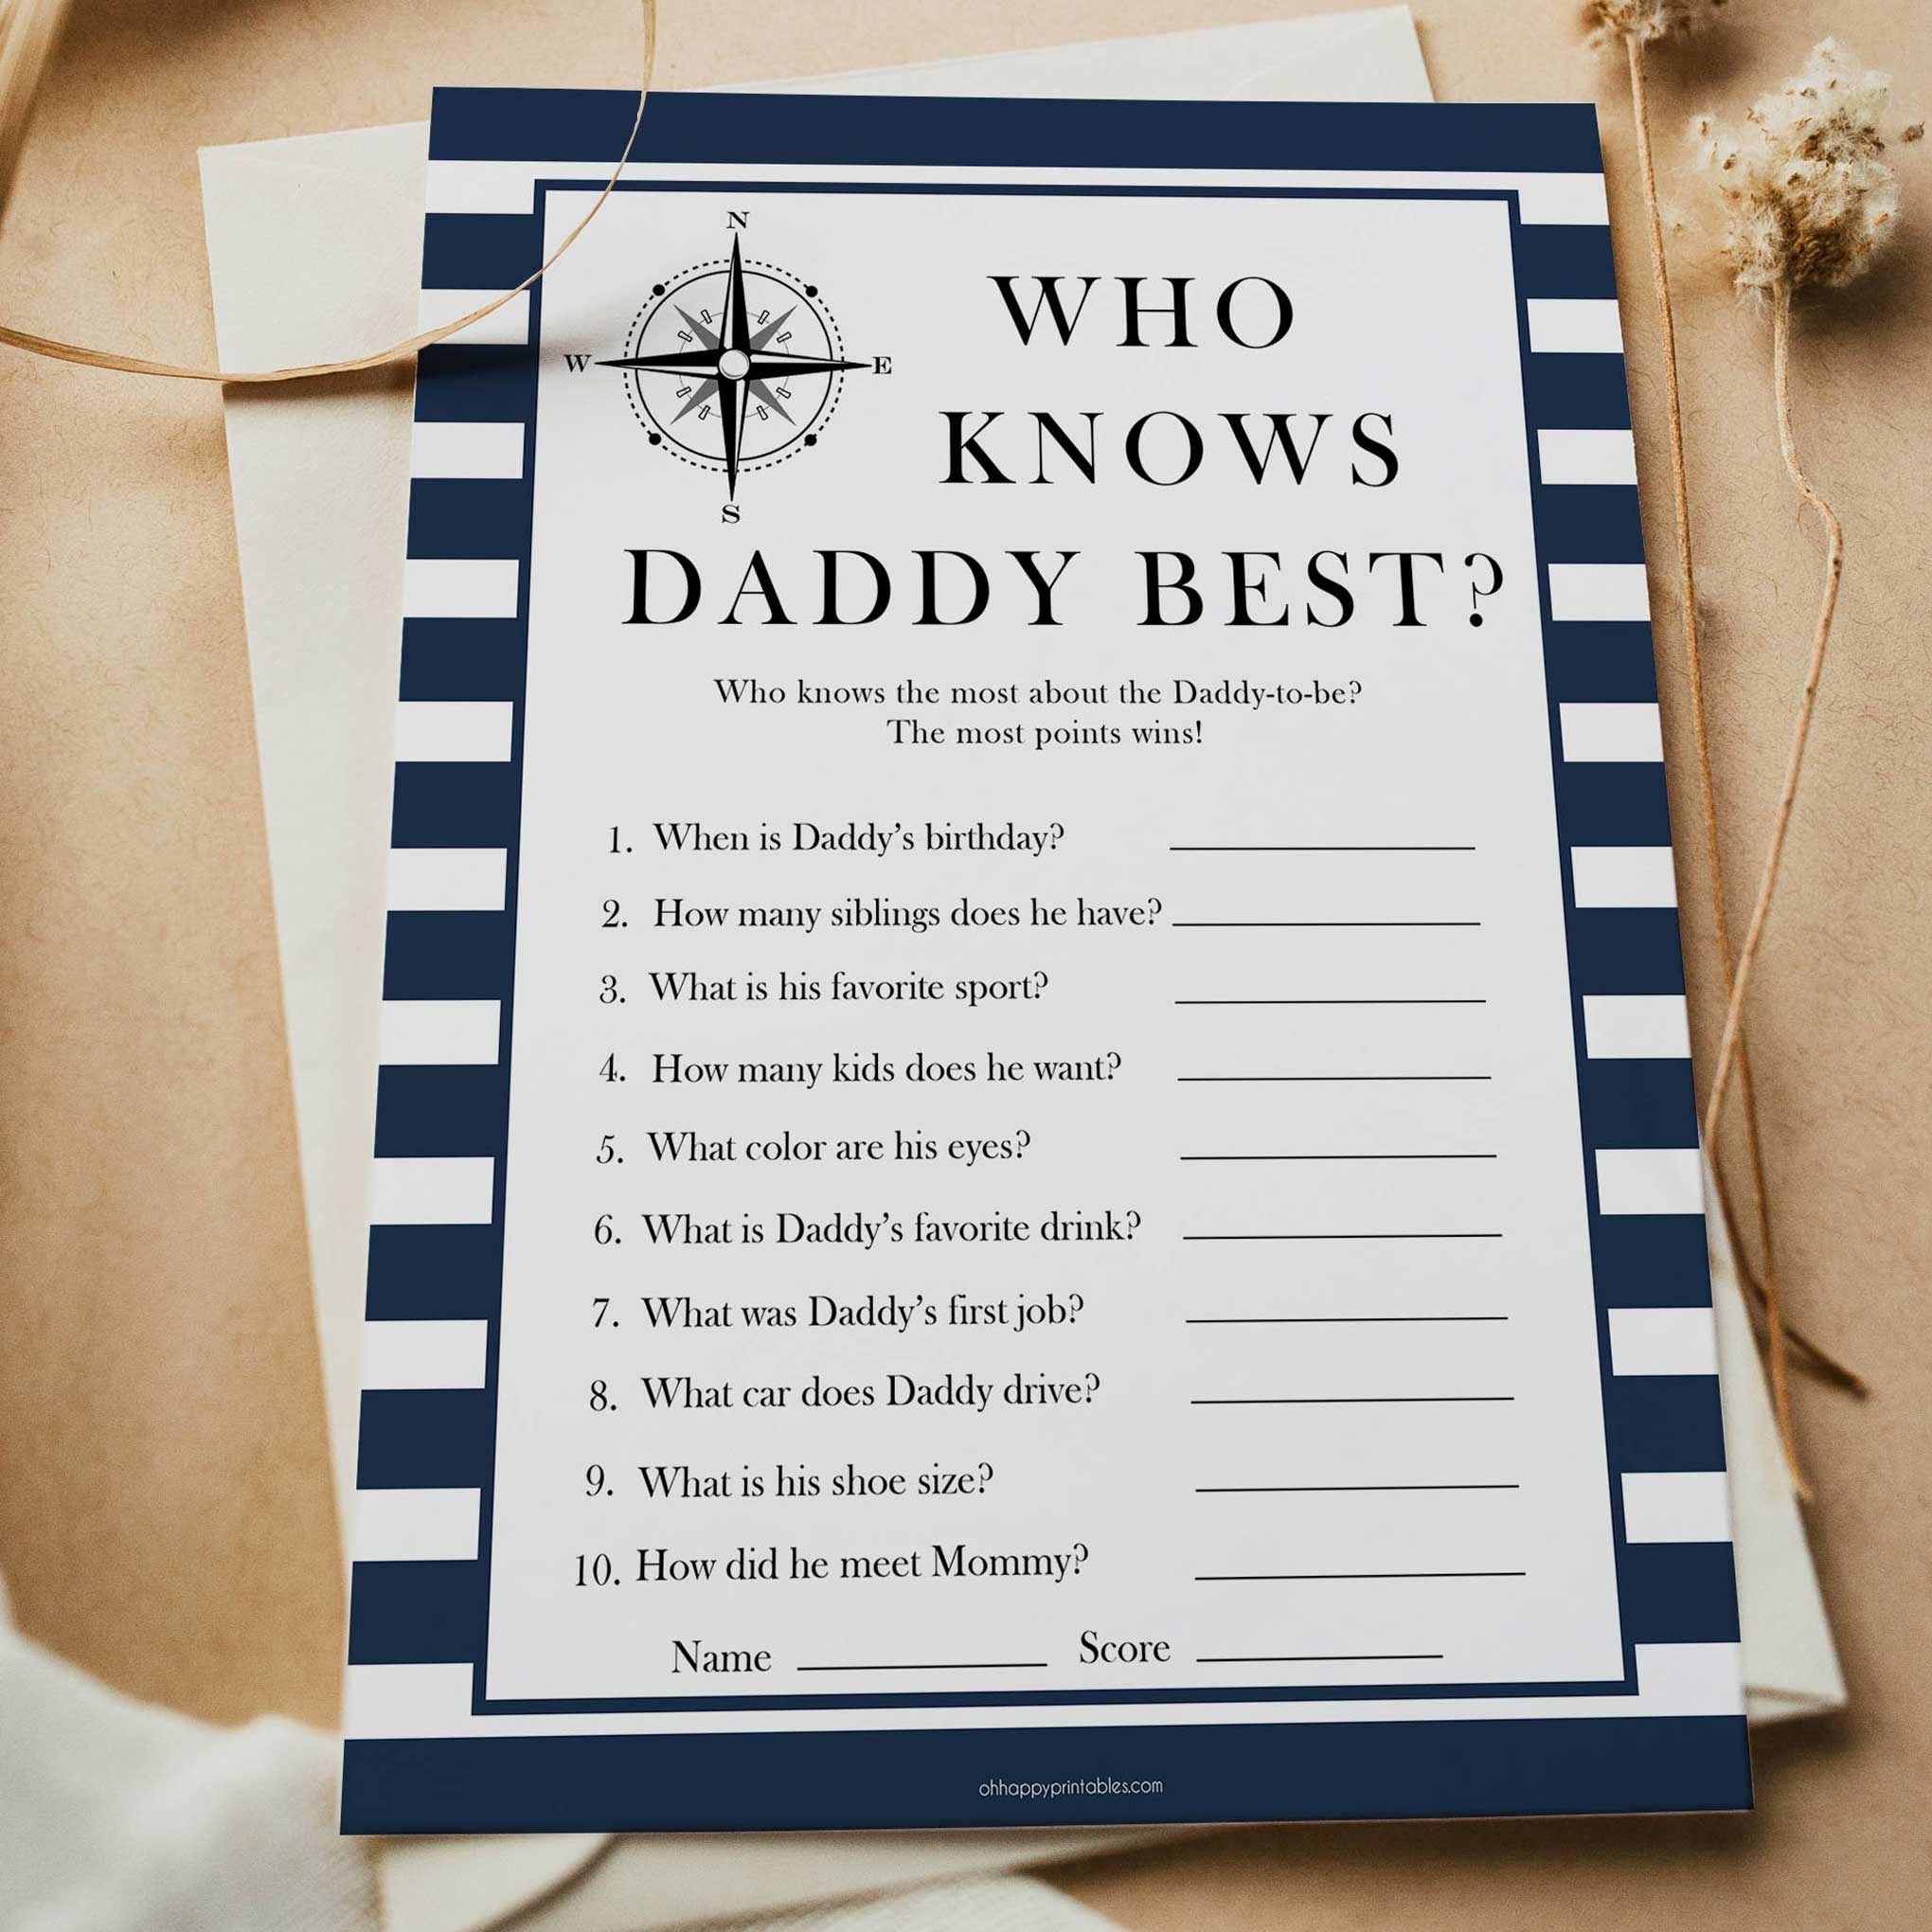 Whats In Your Phone Game - Nautical Printable Baby Shower Games